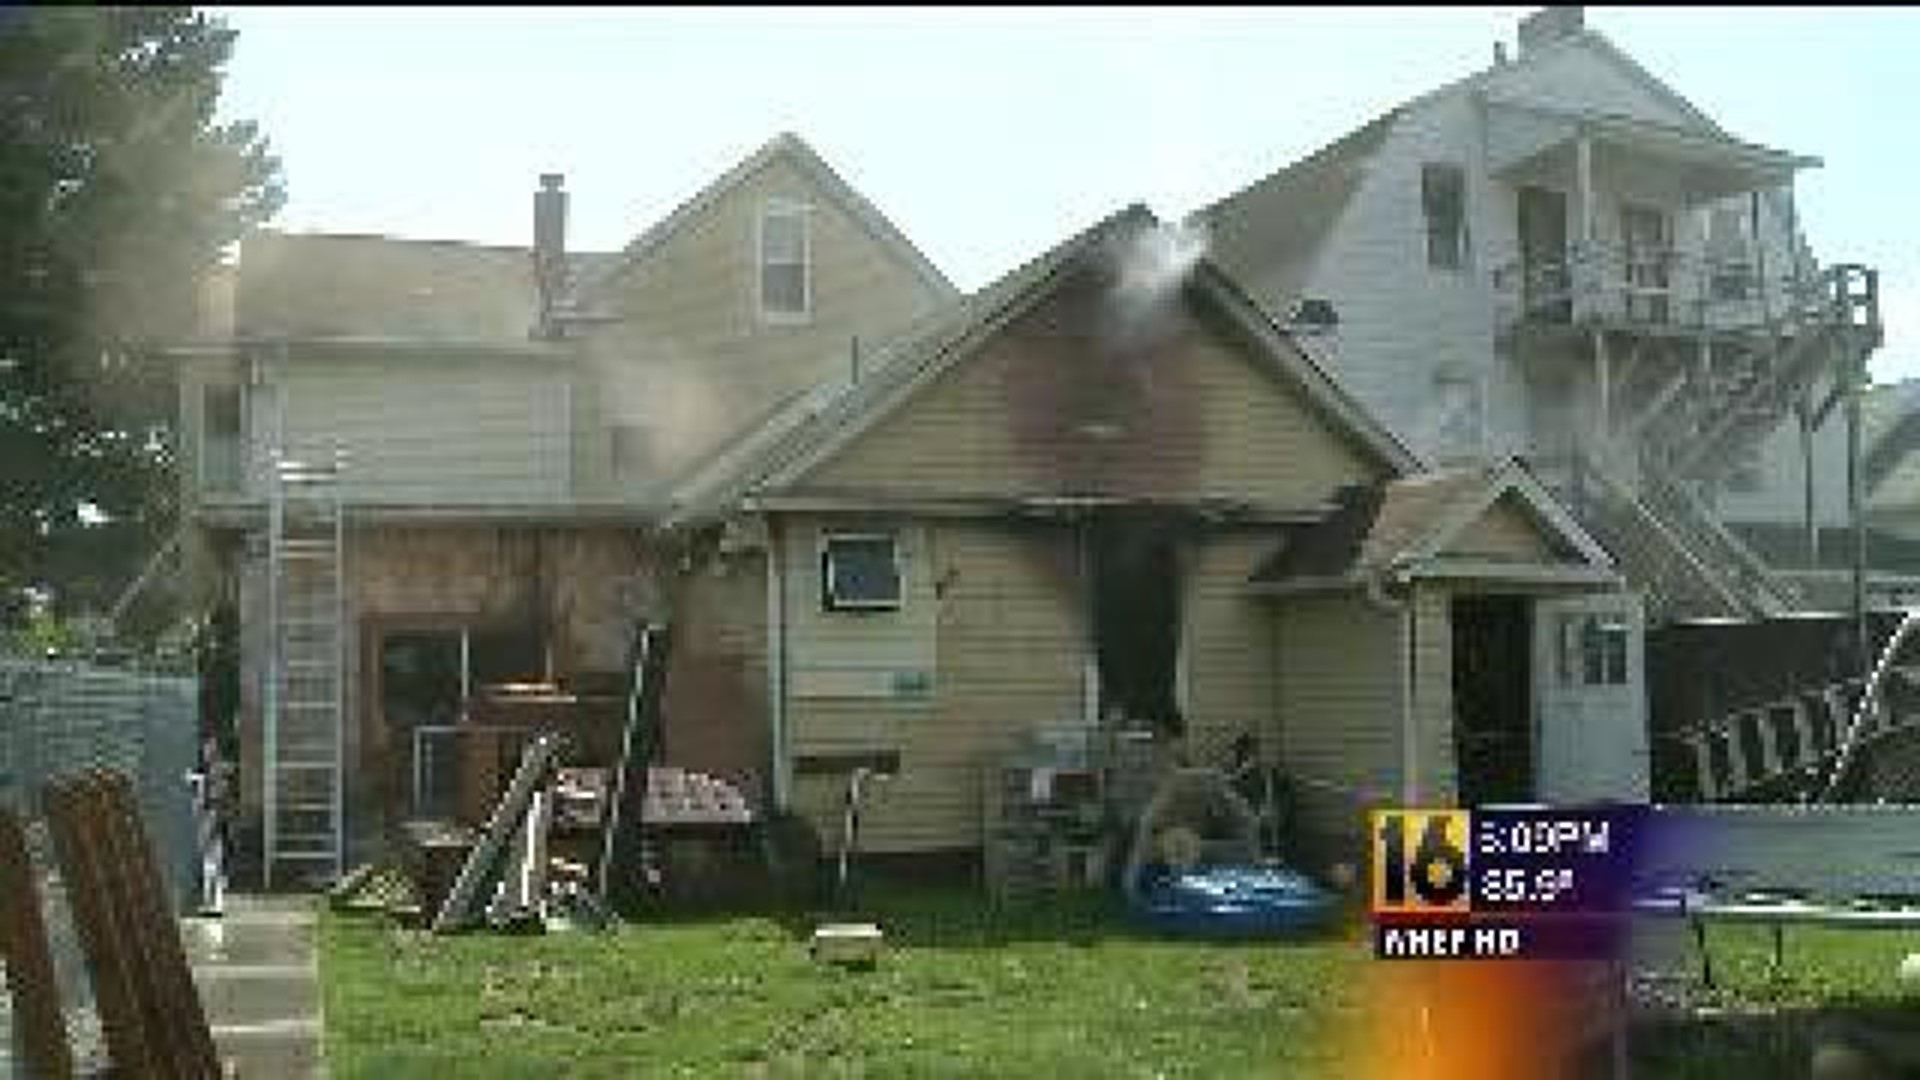 Home Damaged By Fire, Dogs Rescued